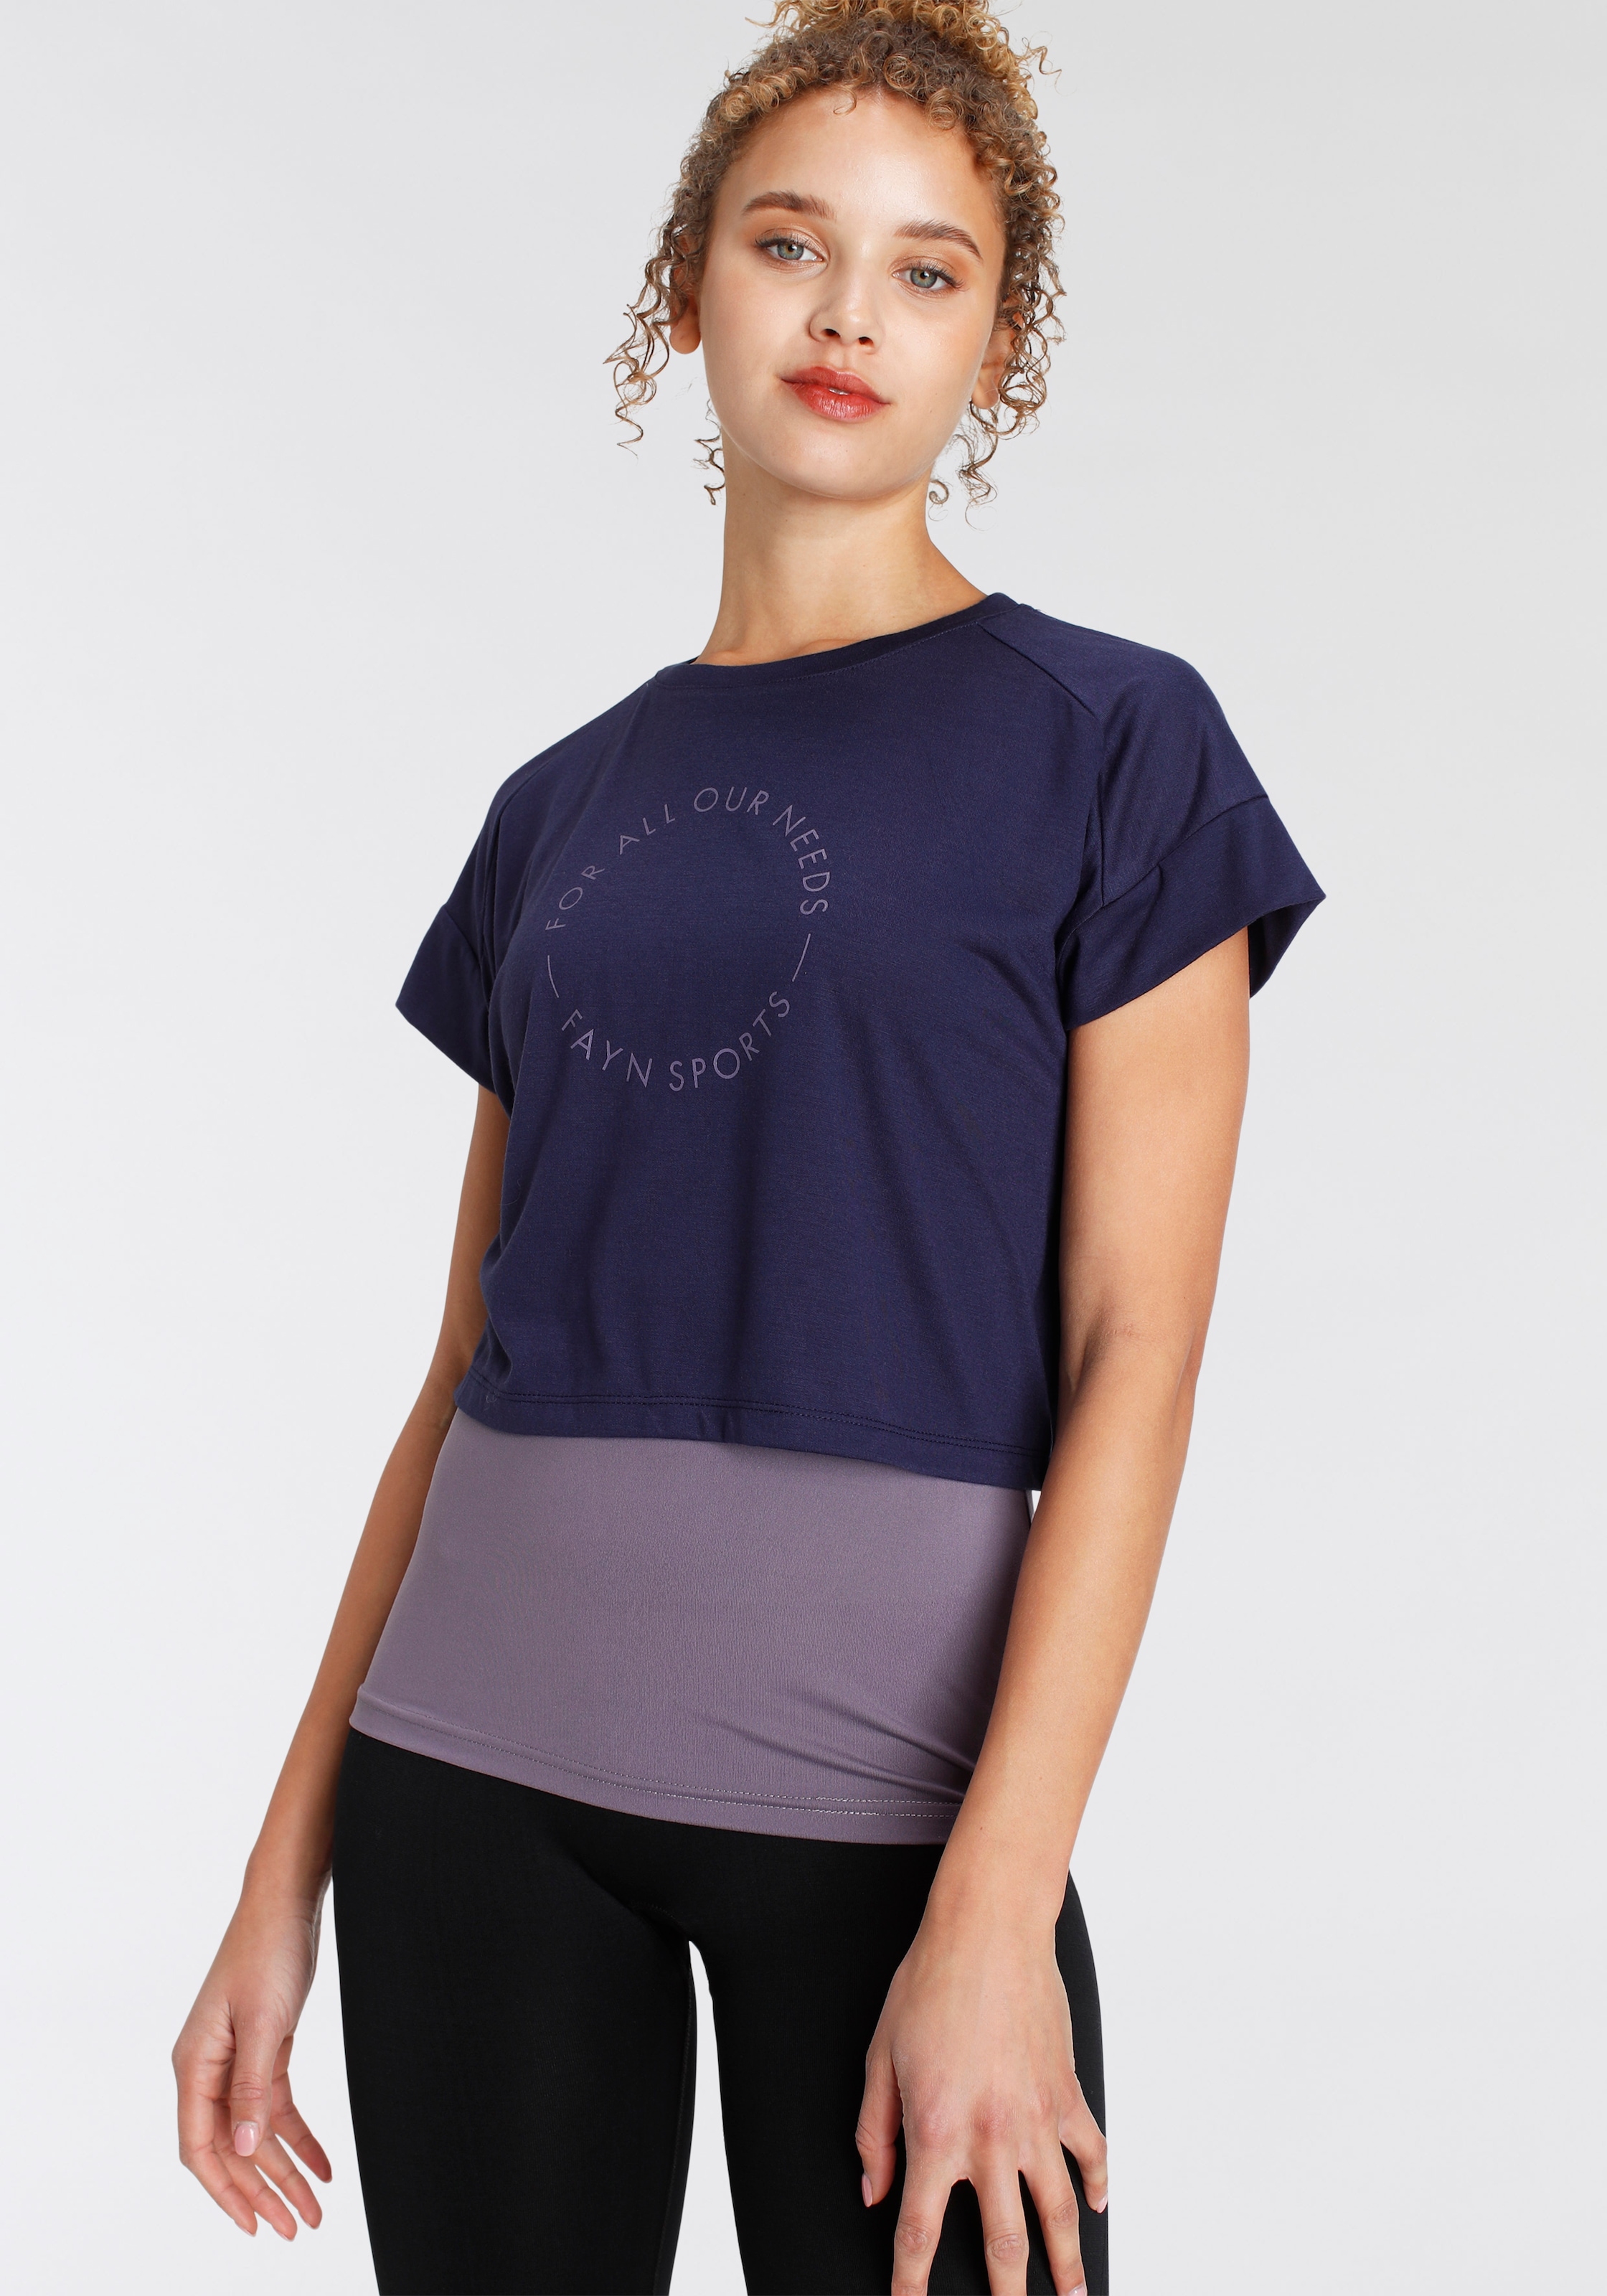 FAYN SPORTS T-Shirt Top«, tlg.) 2 bei (Set, »Cropped ♕